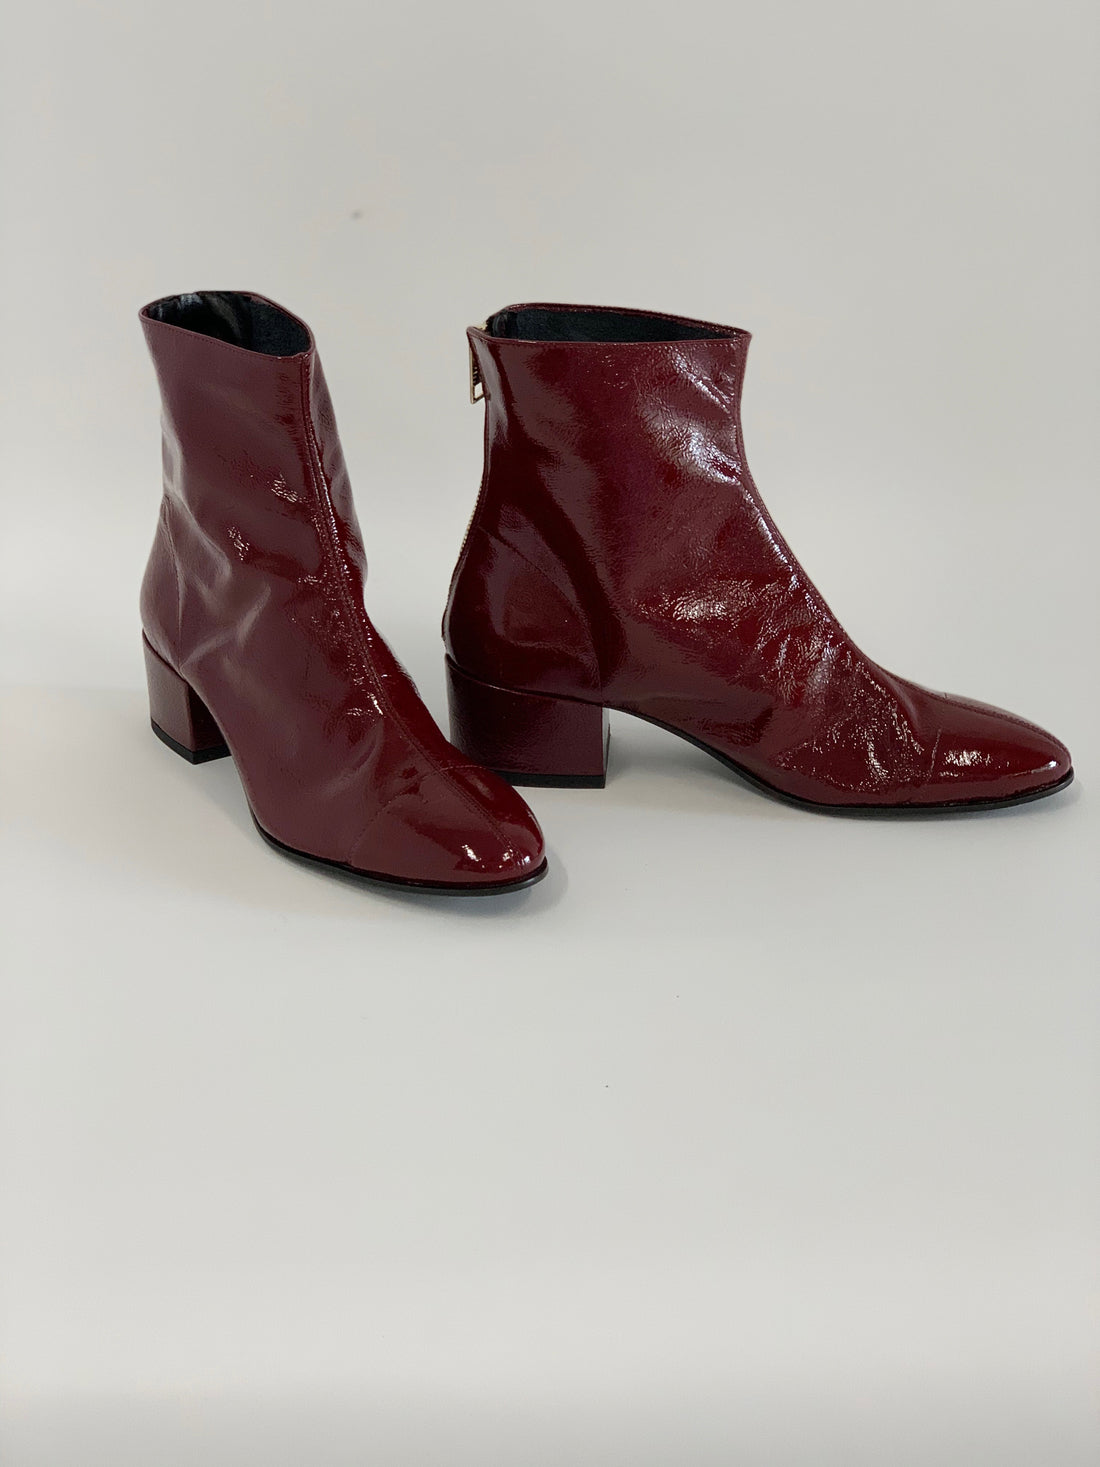 Round Toe Unlined Bootie Red Patent - Sample Size 37